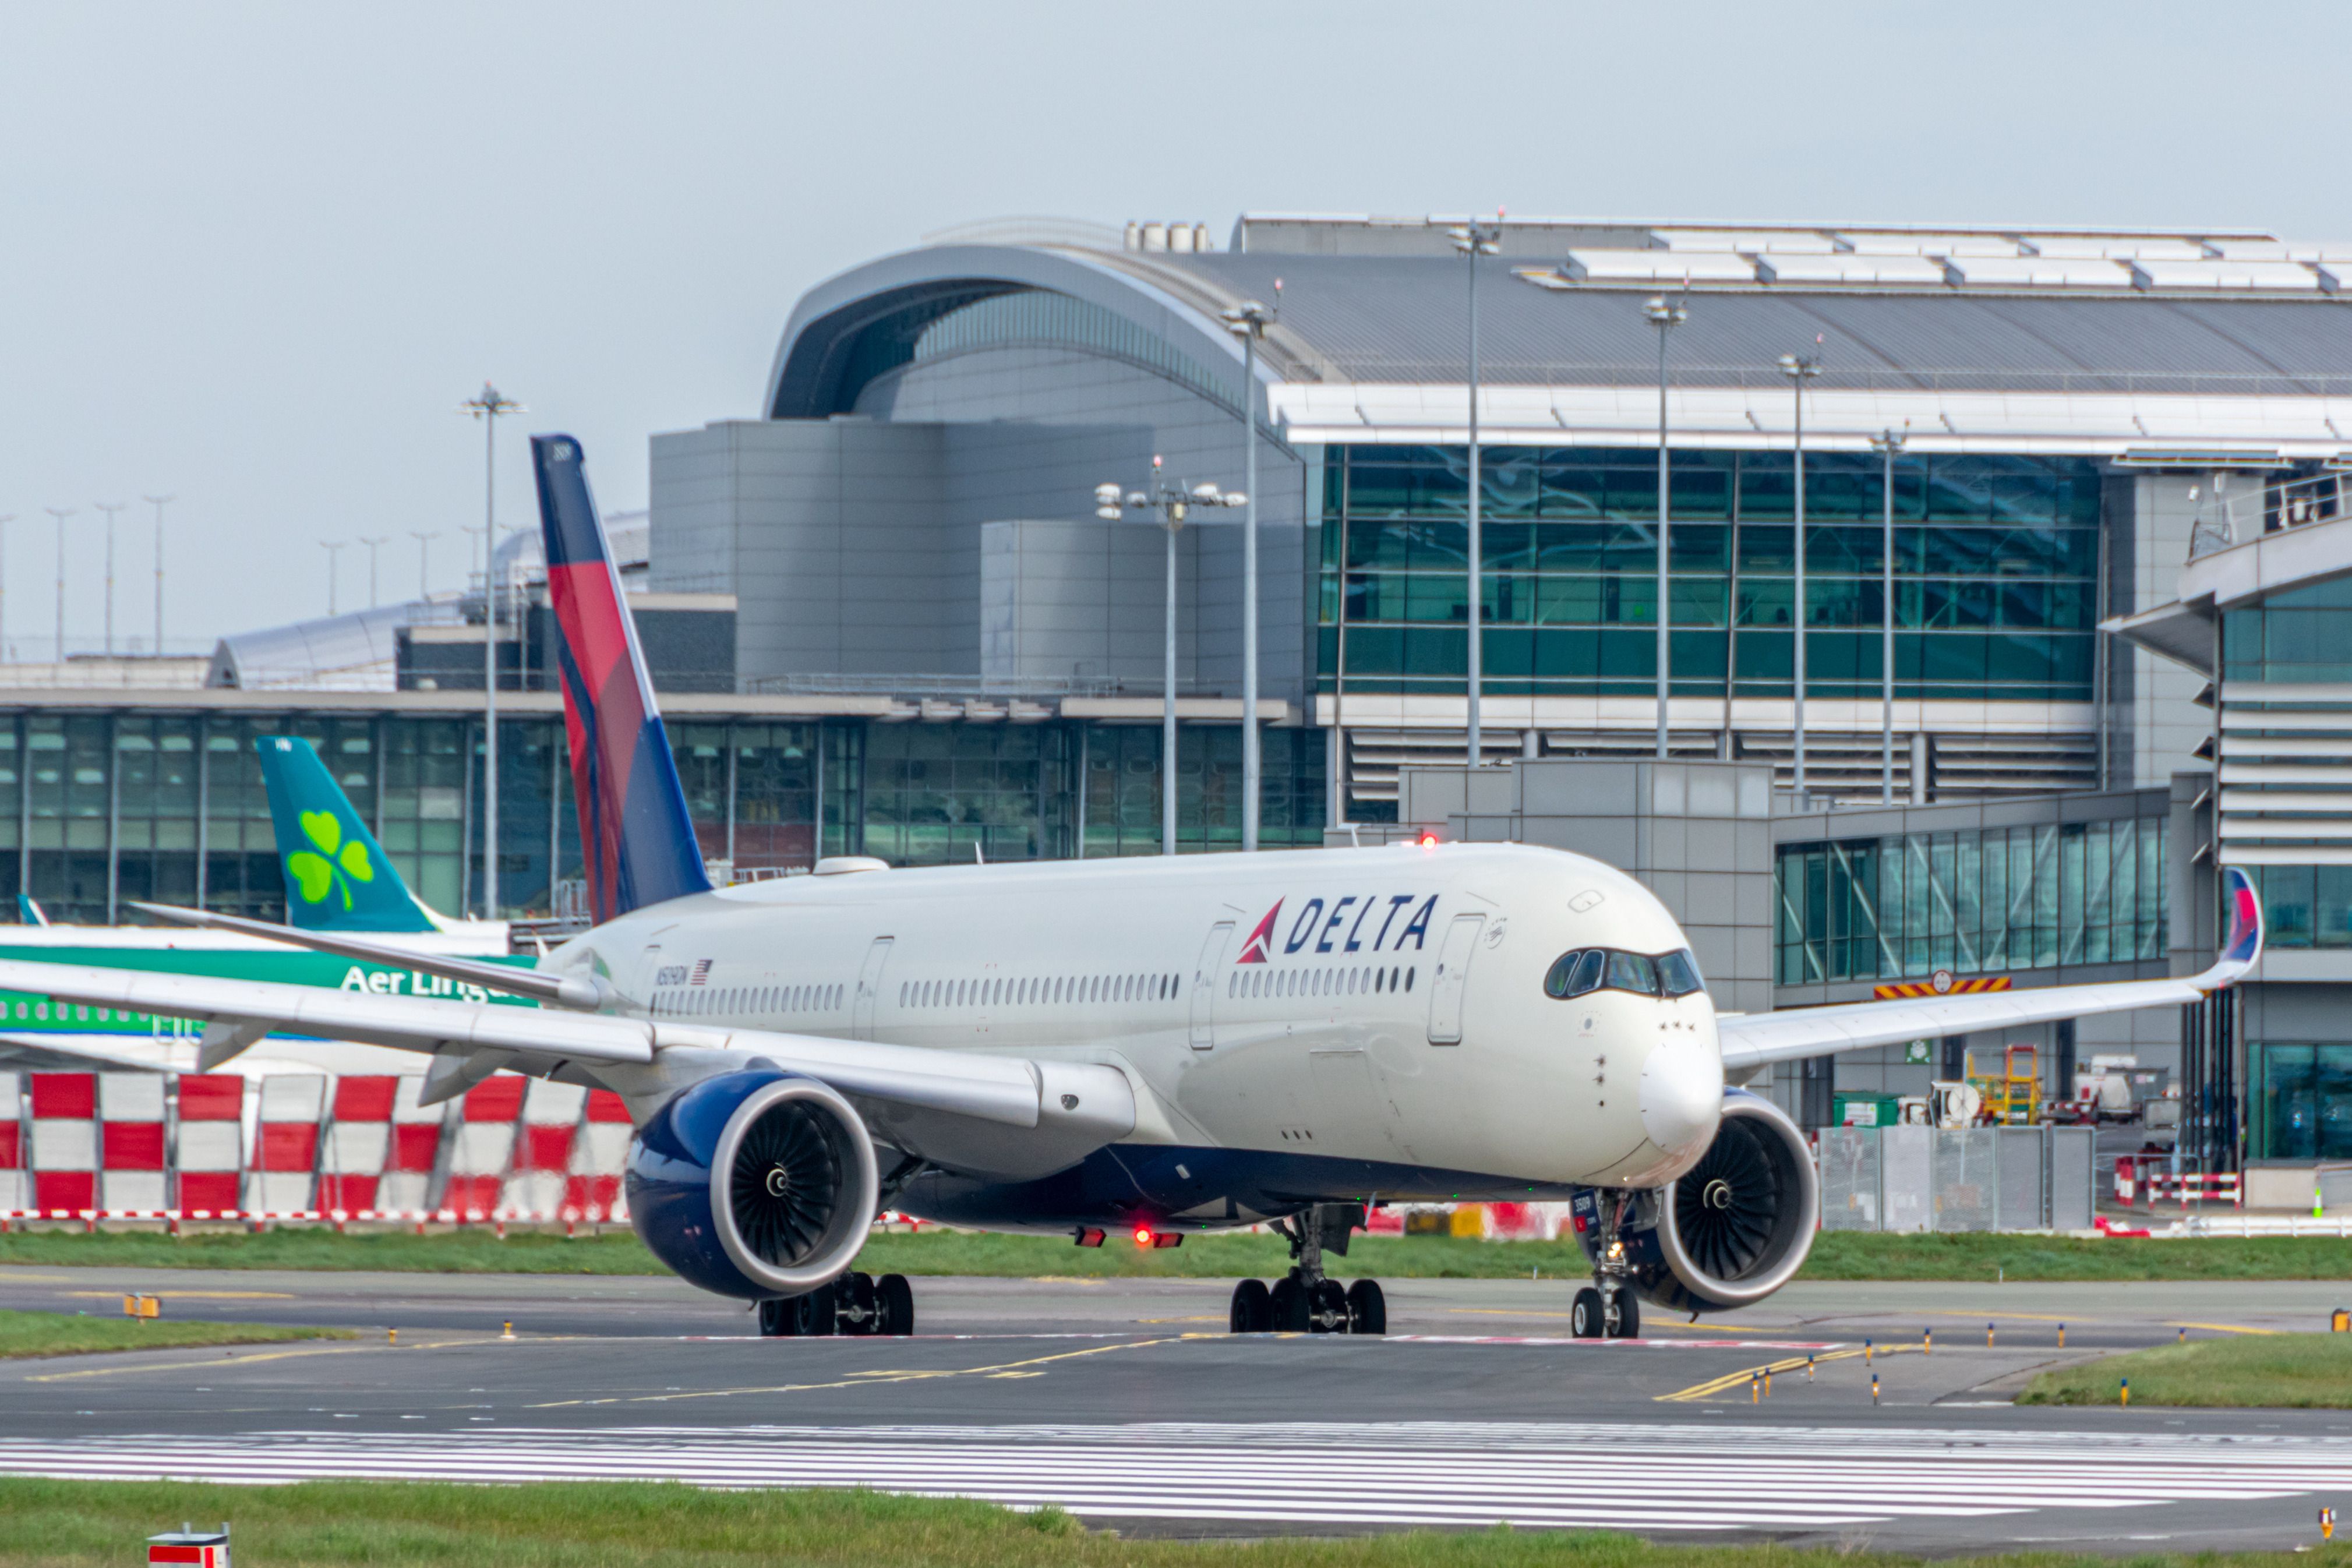 A Delta Air Lines Airbus A350 on an airport apron.